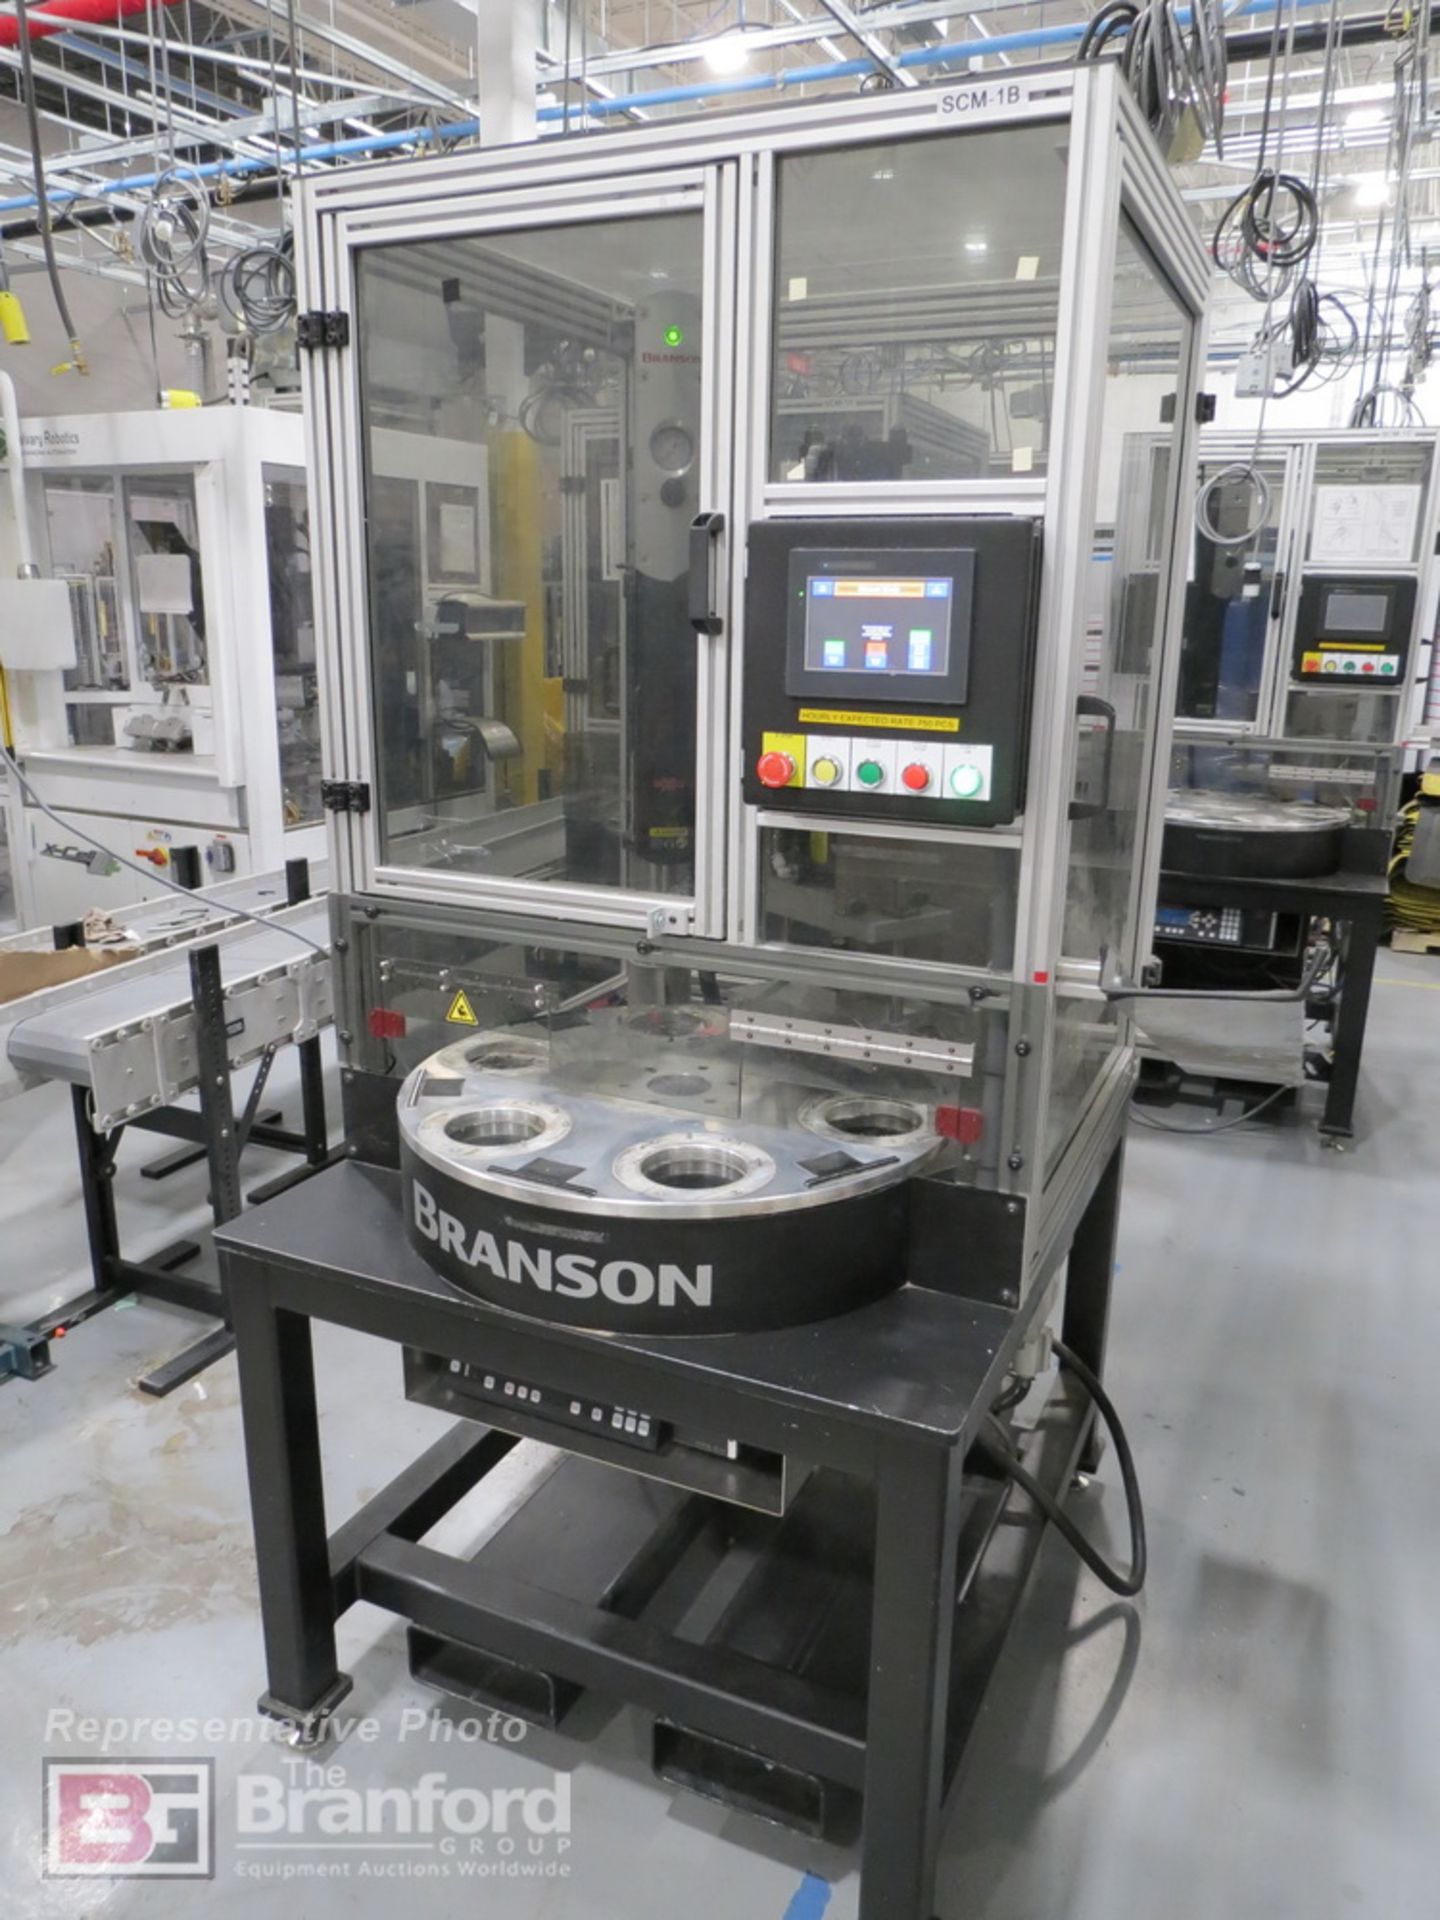 Branson 2000X Series 40 Rotary Ultrasonic Plastic Welding Assembly System (yr. 2020) - Image 2 of 12